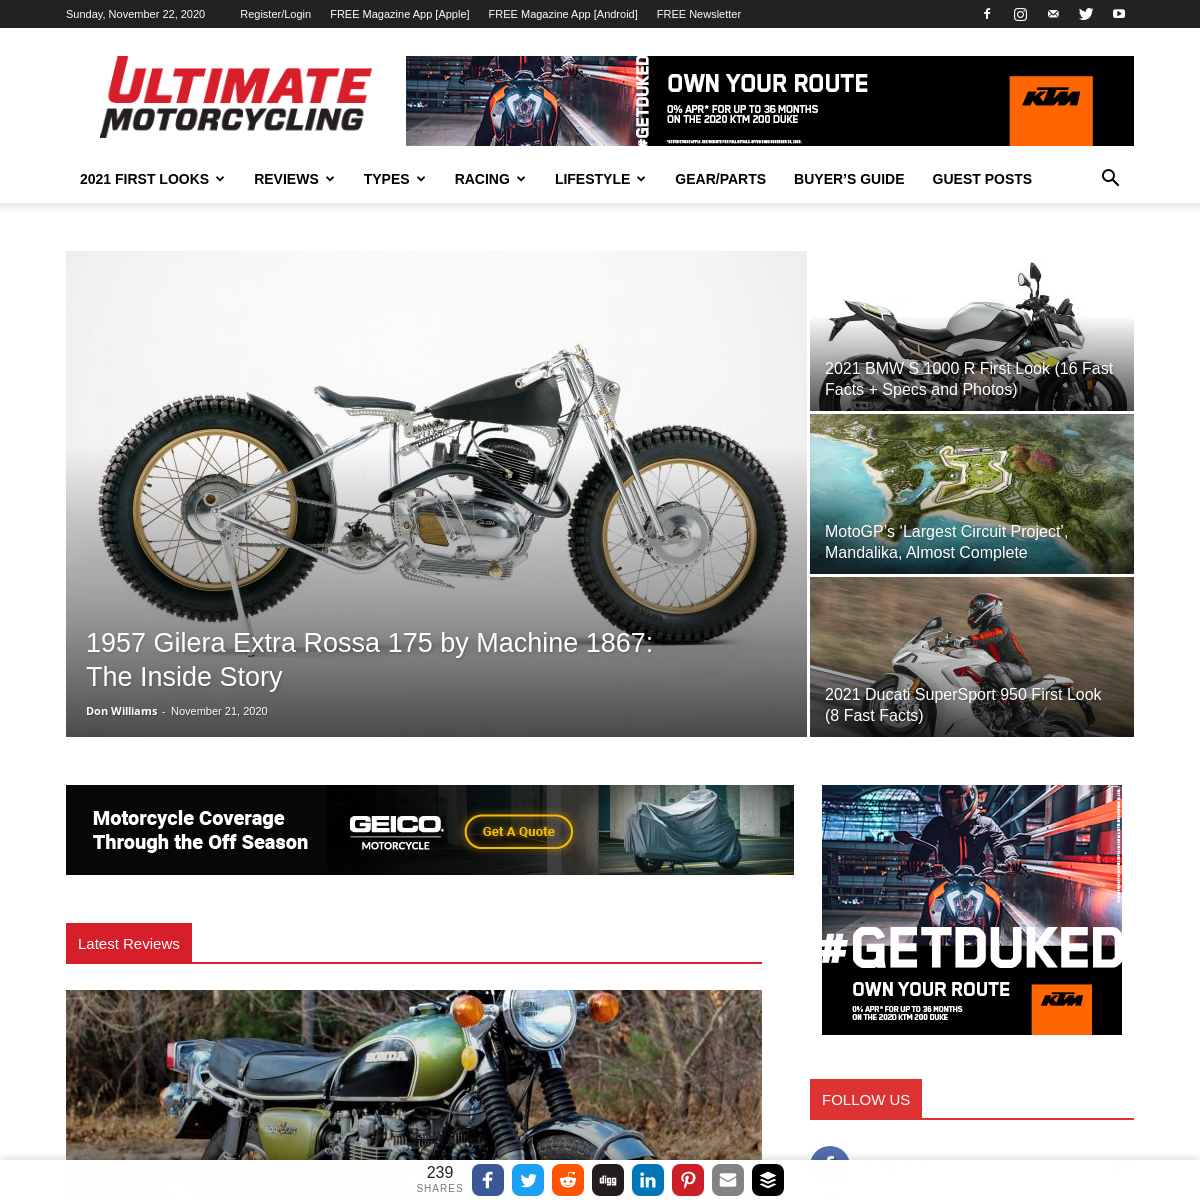 A complete backup of ultimatemotorcycling.com